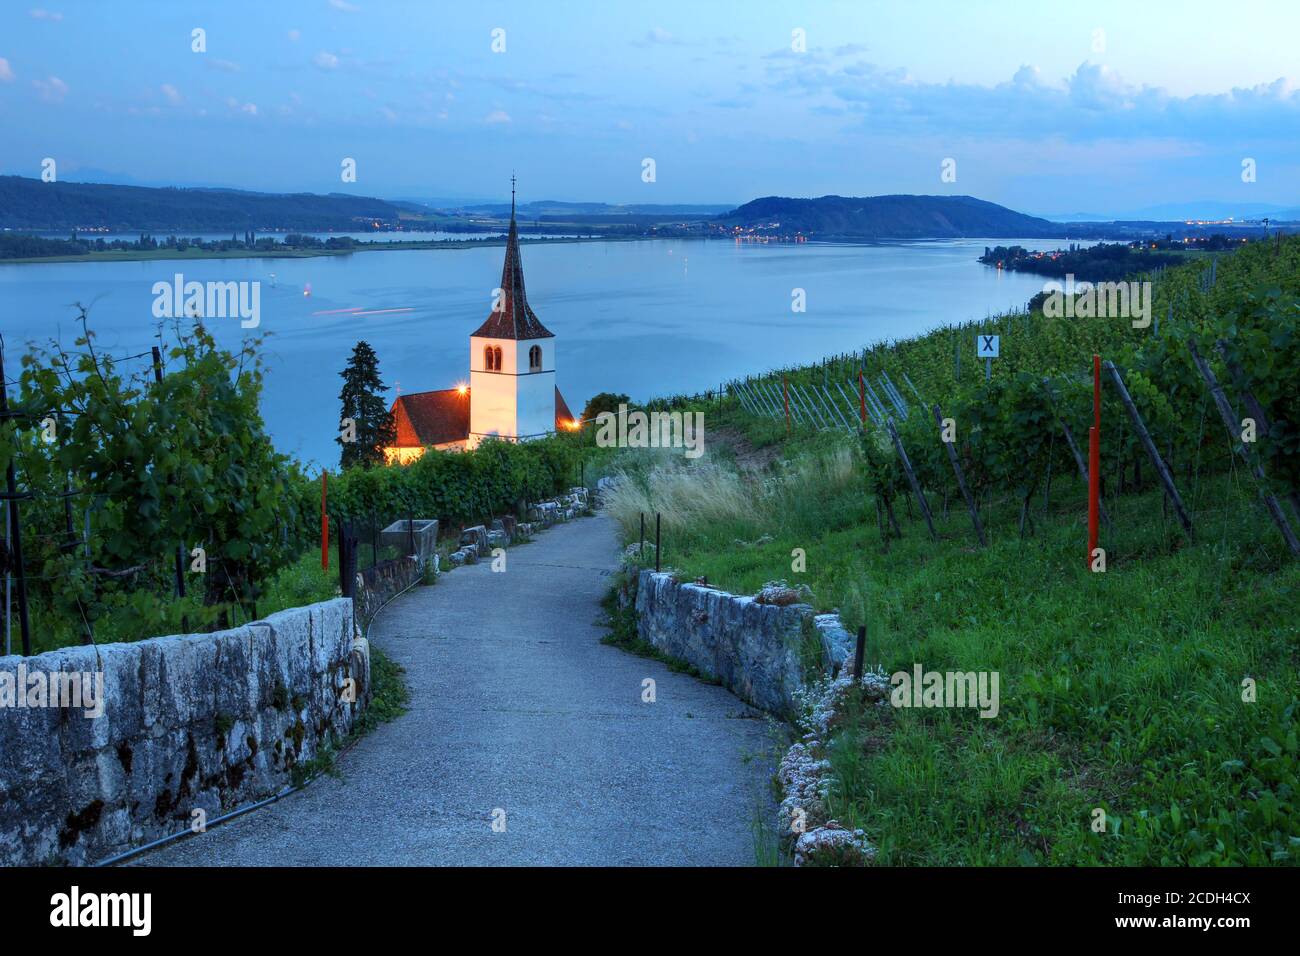 Evening landscape with a winding road and church in the vineyards above Ligerz, on Lake Biel (Lake Bienne) in Switzerland. Stock Photo